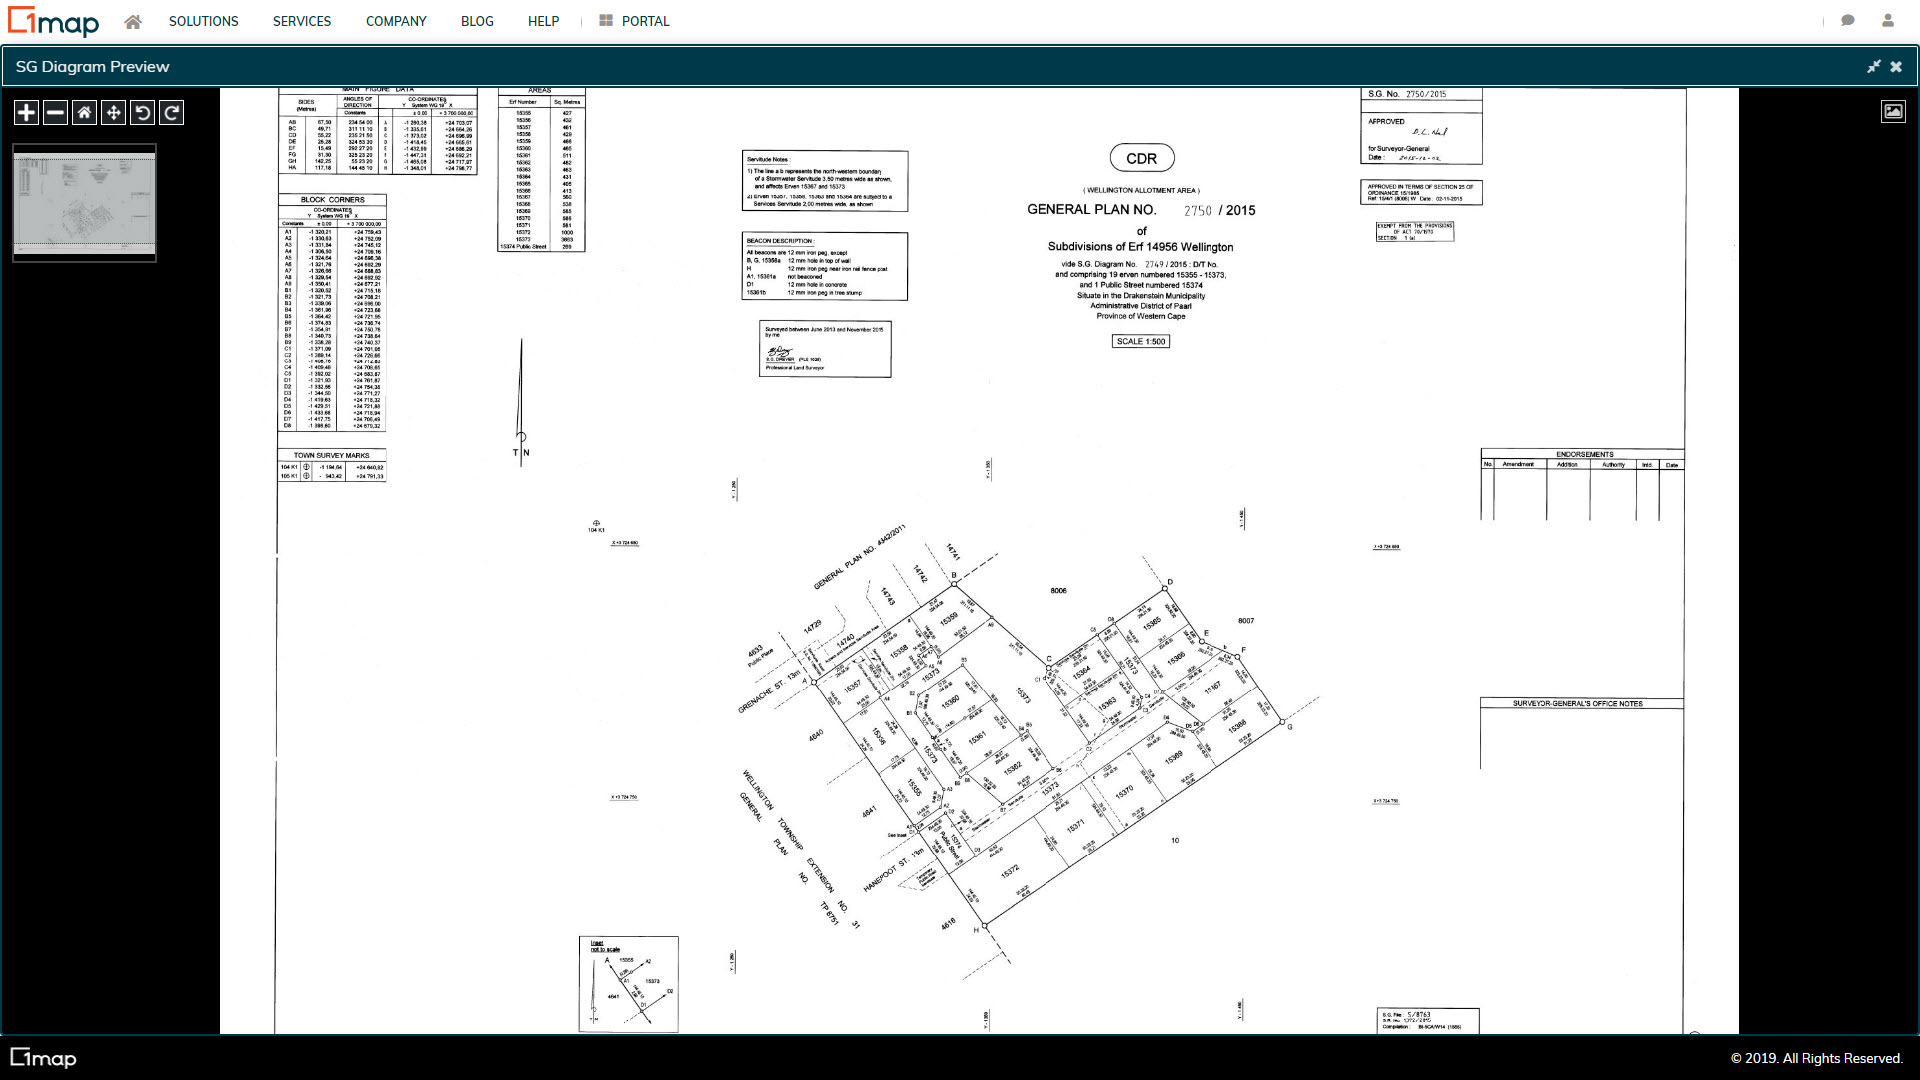 A screenshot of the General Plans layer.